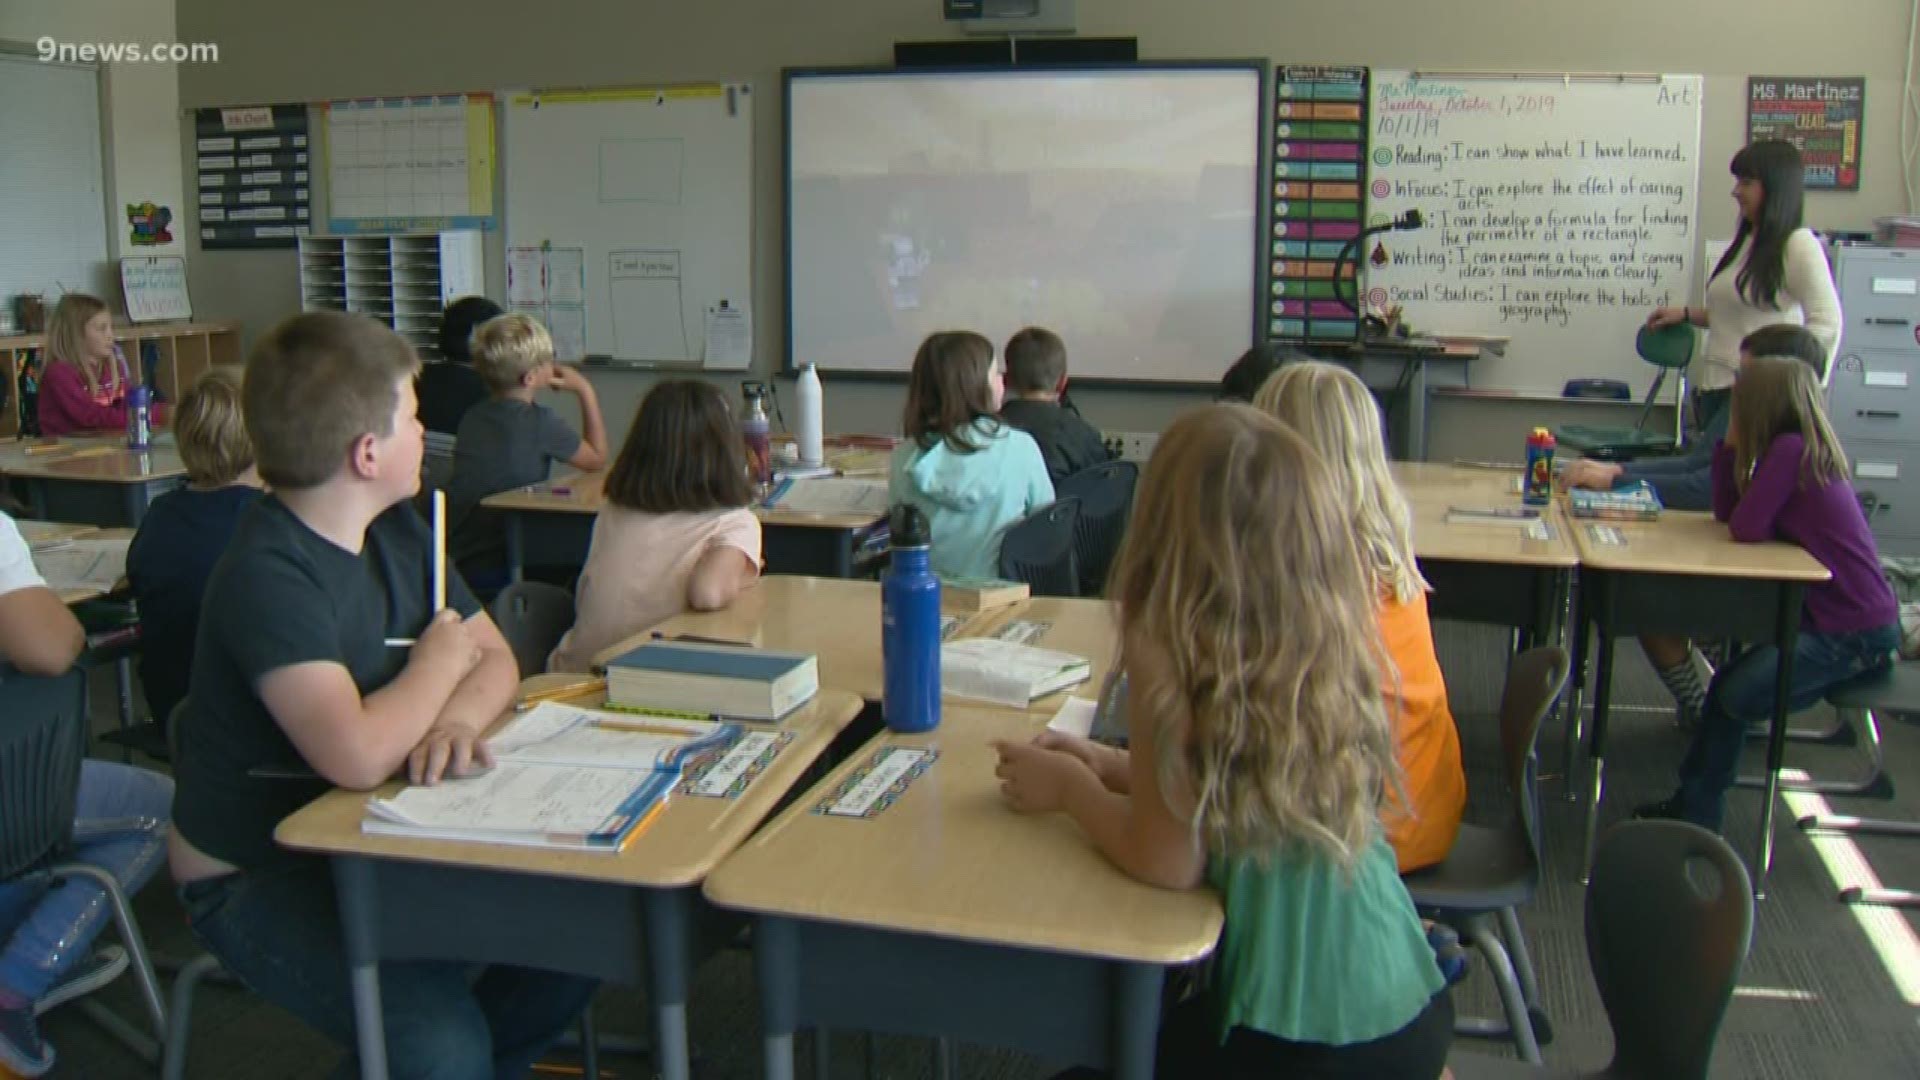 Longfellow Elementary in Salida uses "mindfulness exercises" to help students concentrate.